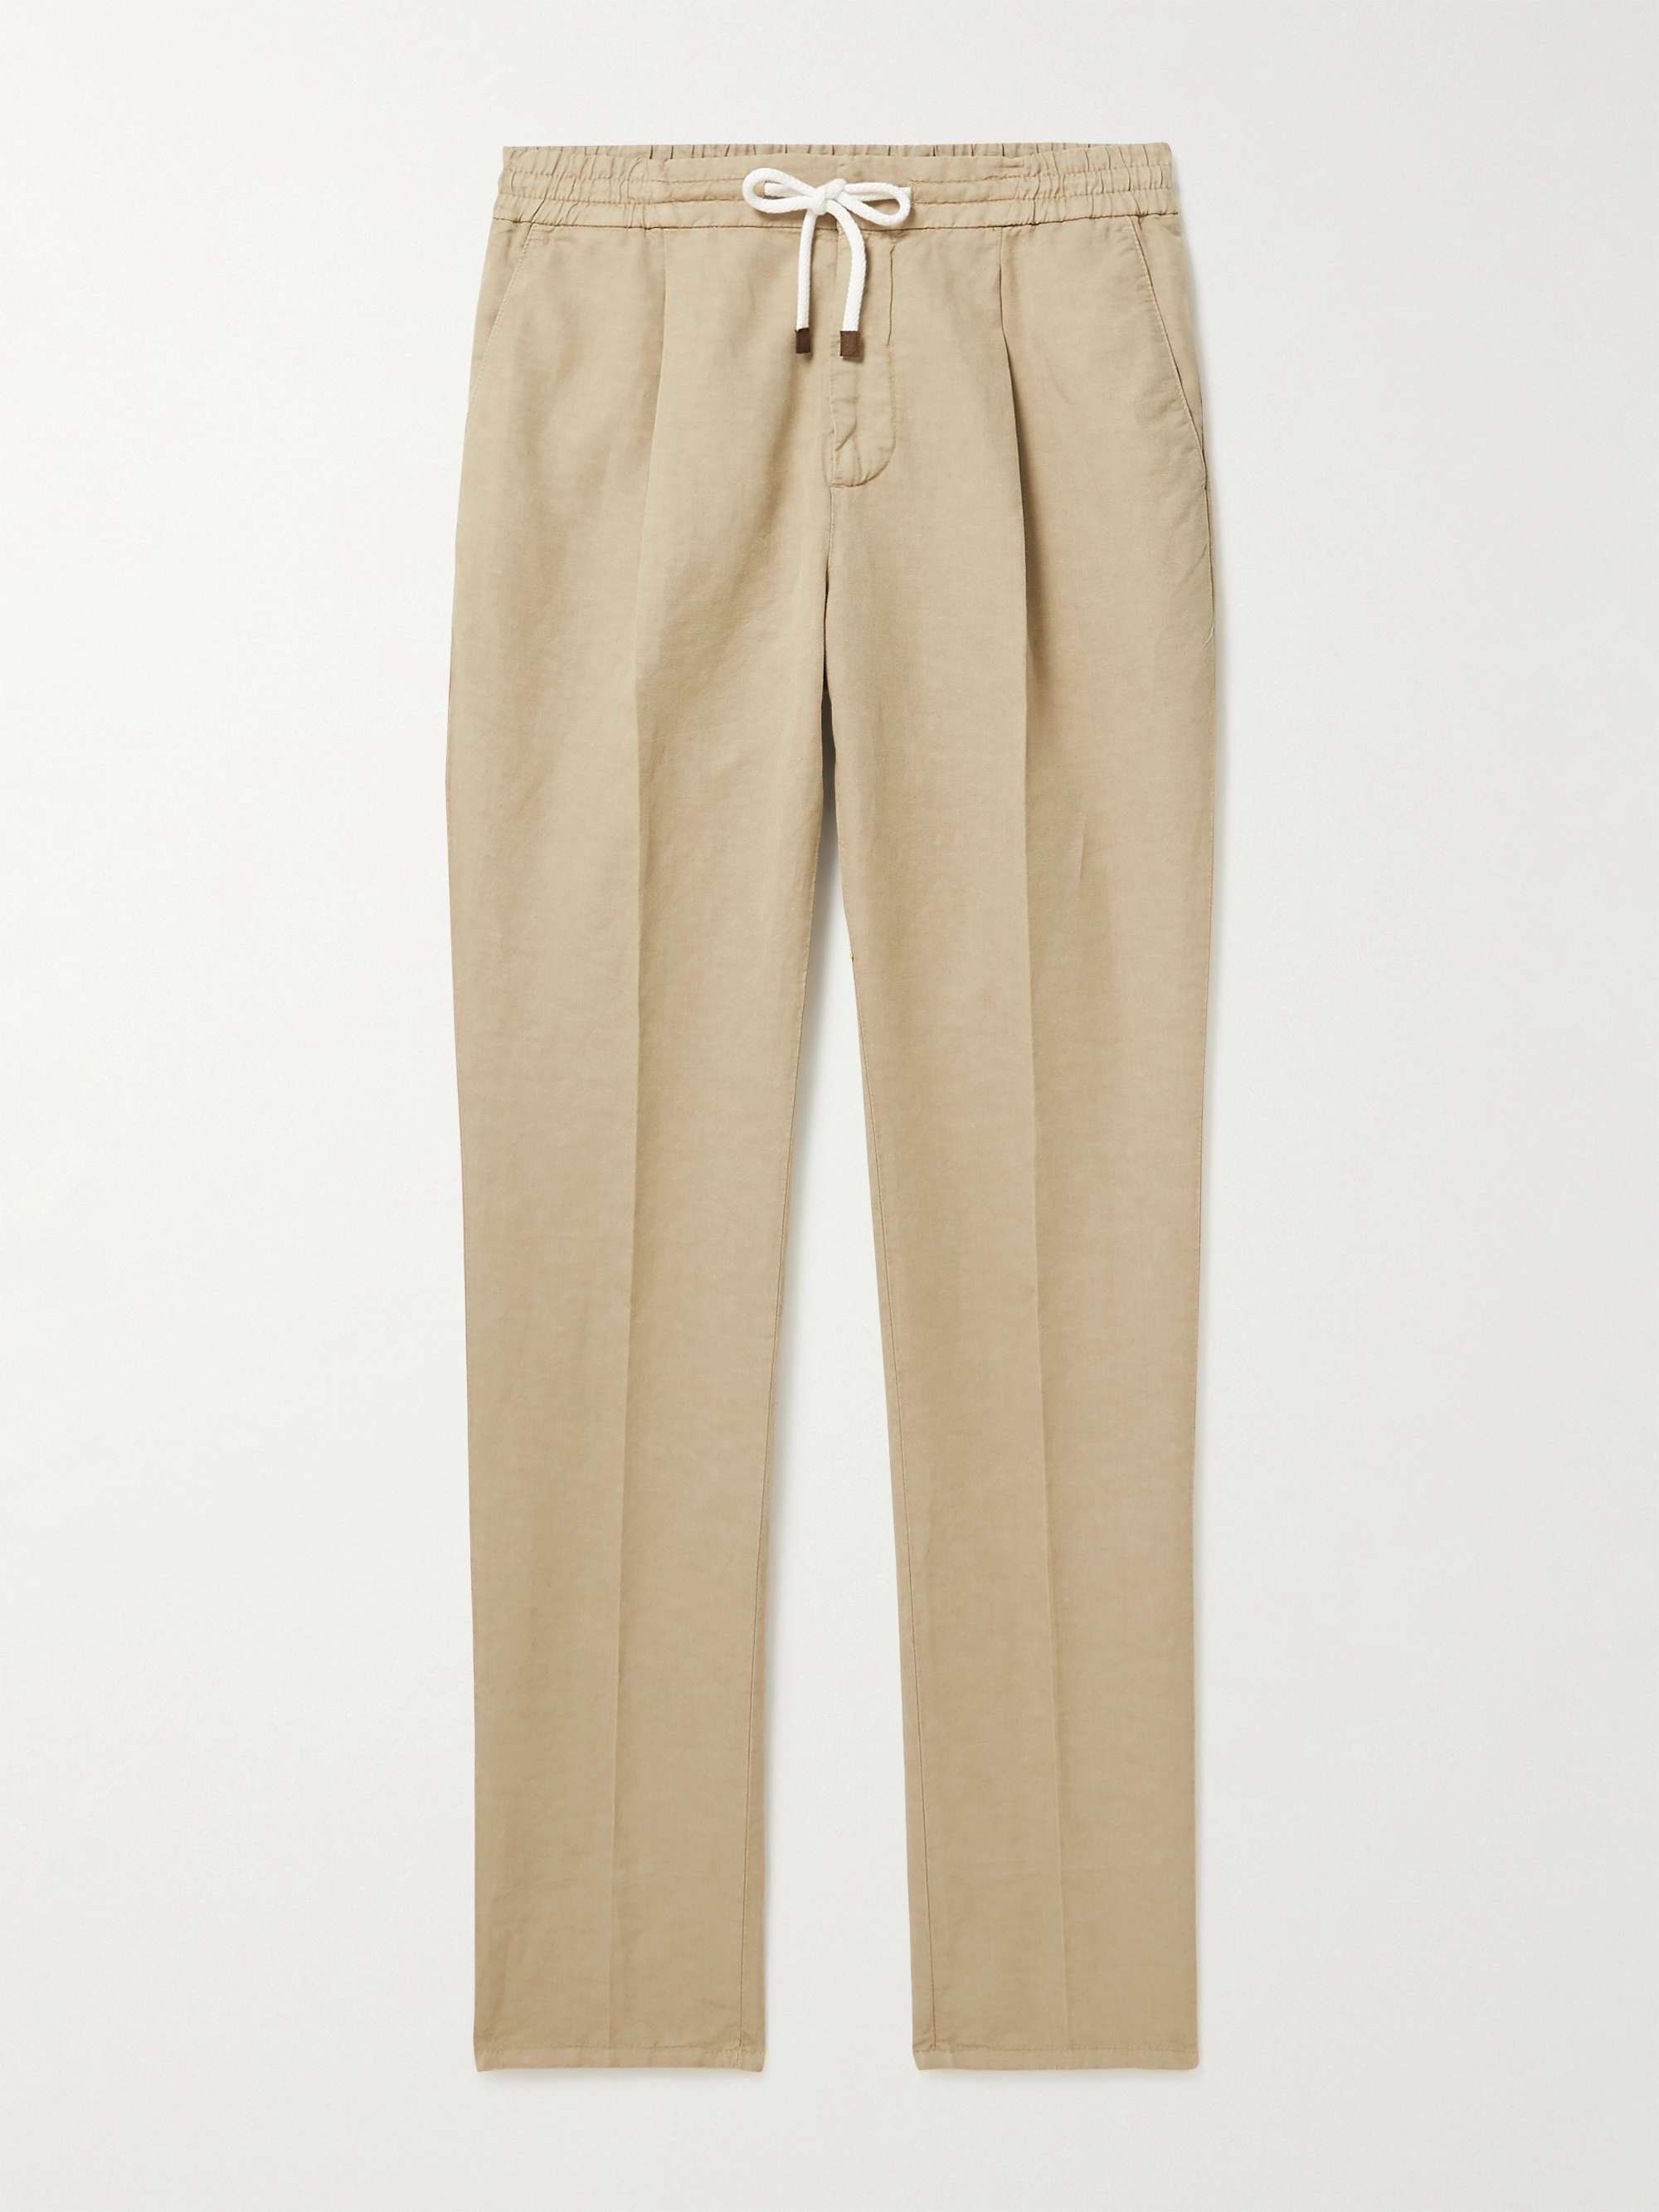 BRUNELLO CUCINELLI Slim-Fit Tapered Linen and Cotton-Blend Drawstring Trousers